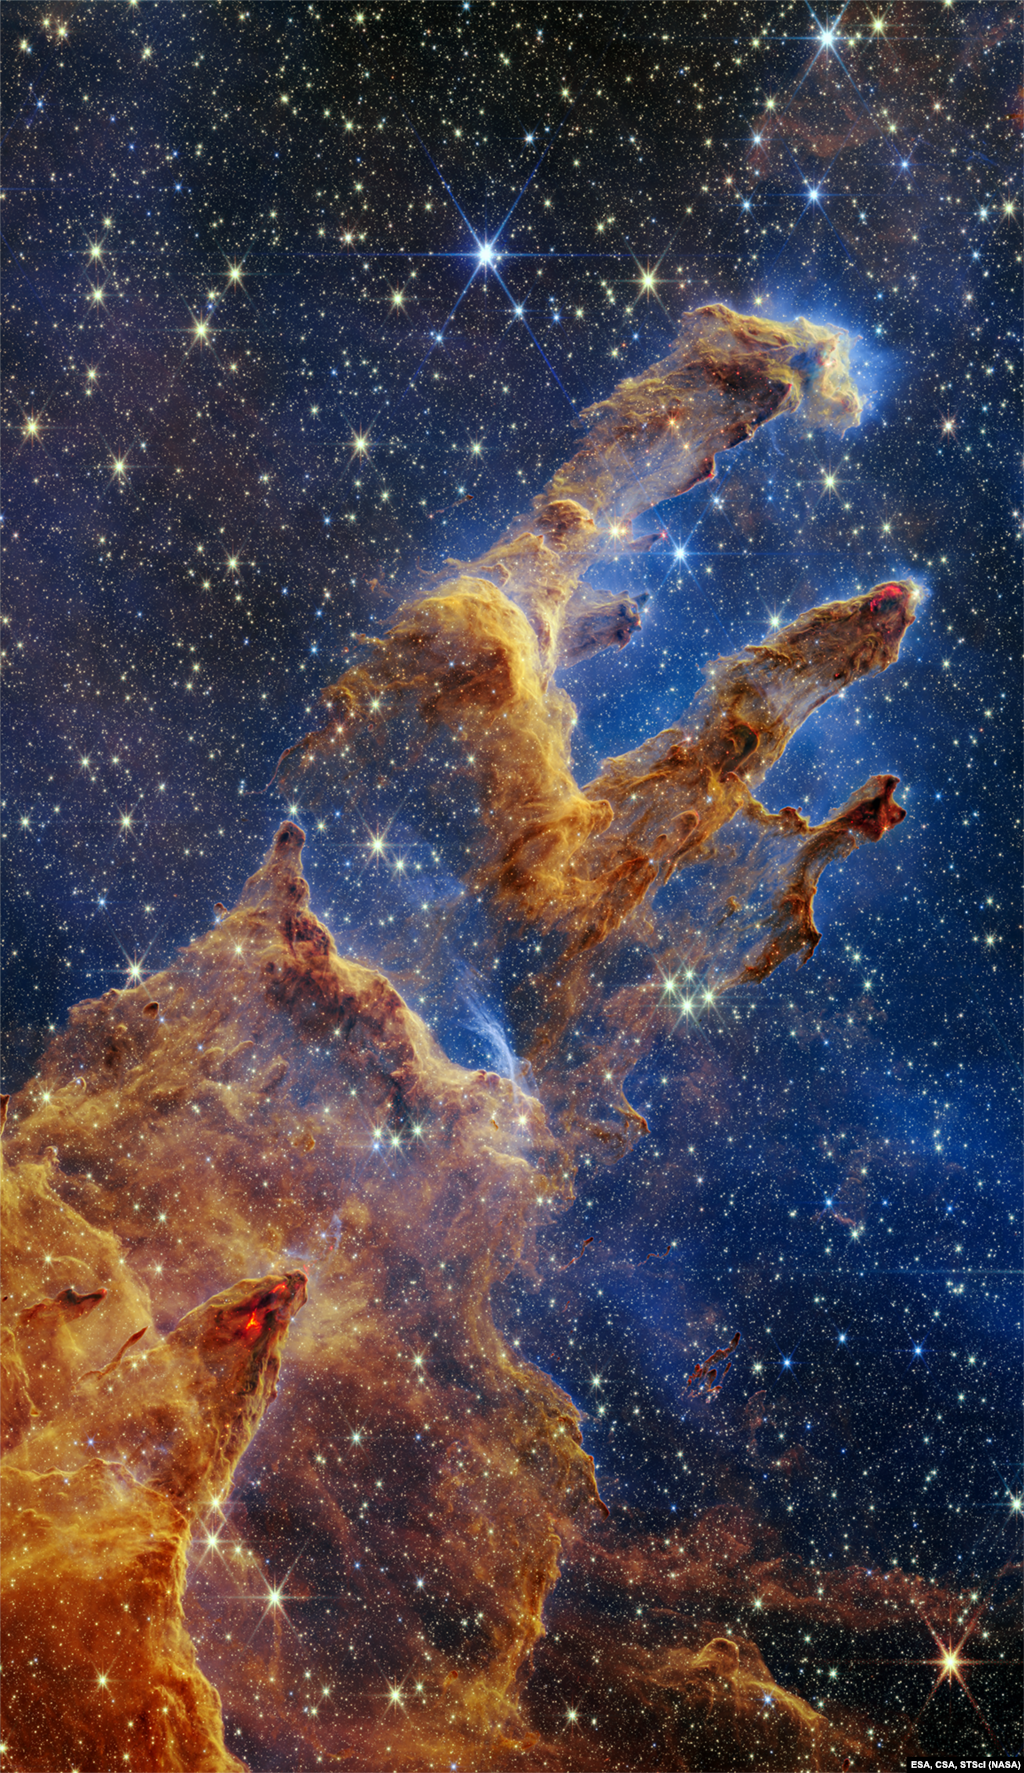 NASA&rsquo;s James Webb Space Telescope has captured a lush, highly detailed landscape &ndash; the iconic Pillars of Creation &ndash; where new stars are forming within dense clouds of gas and dust.